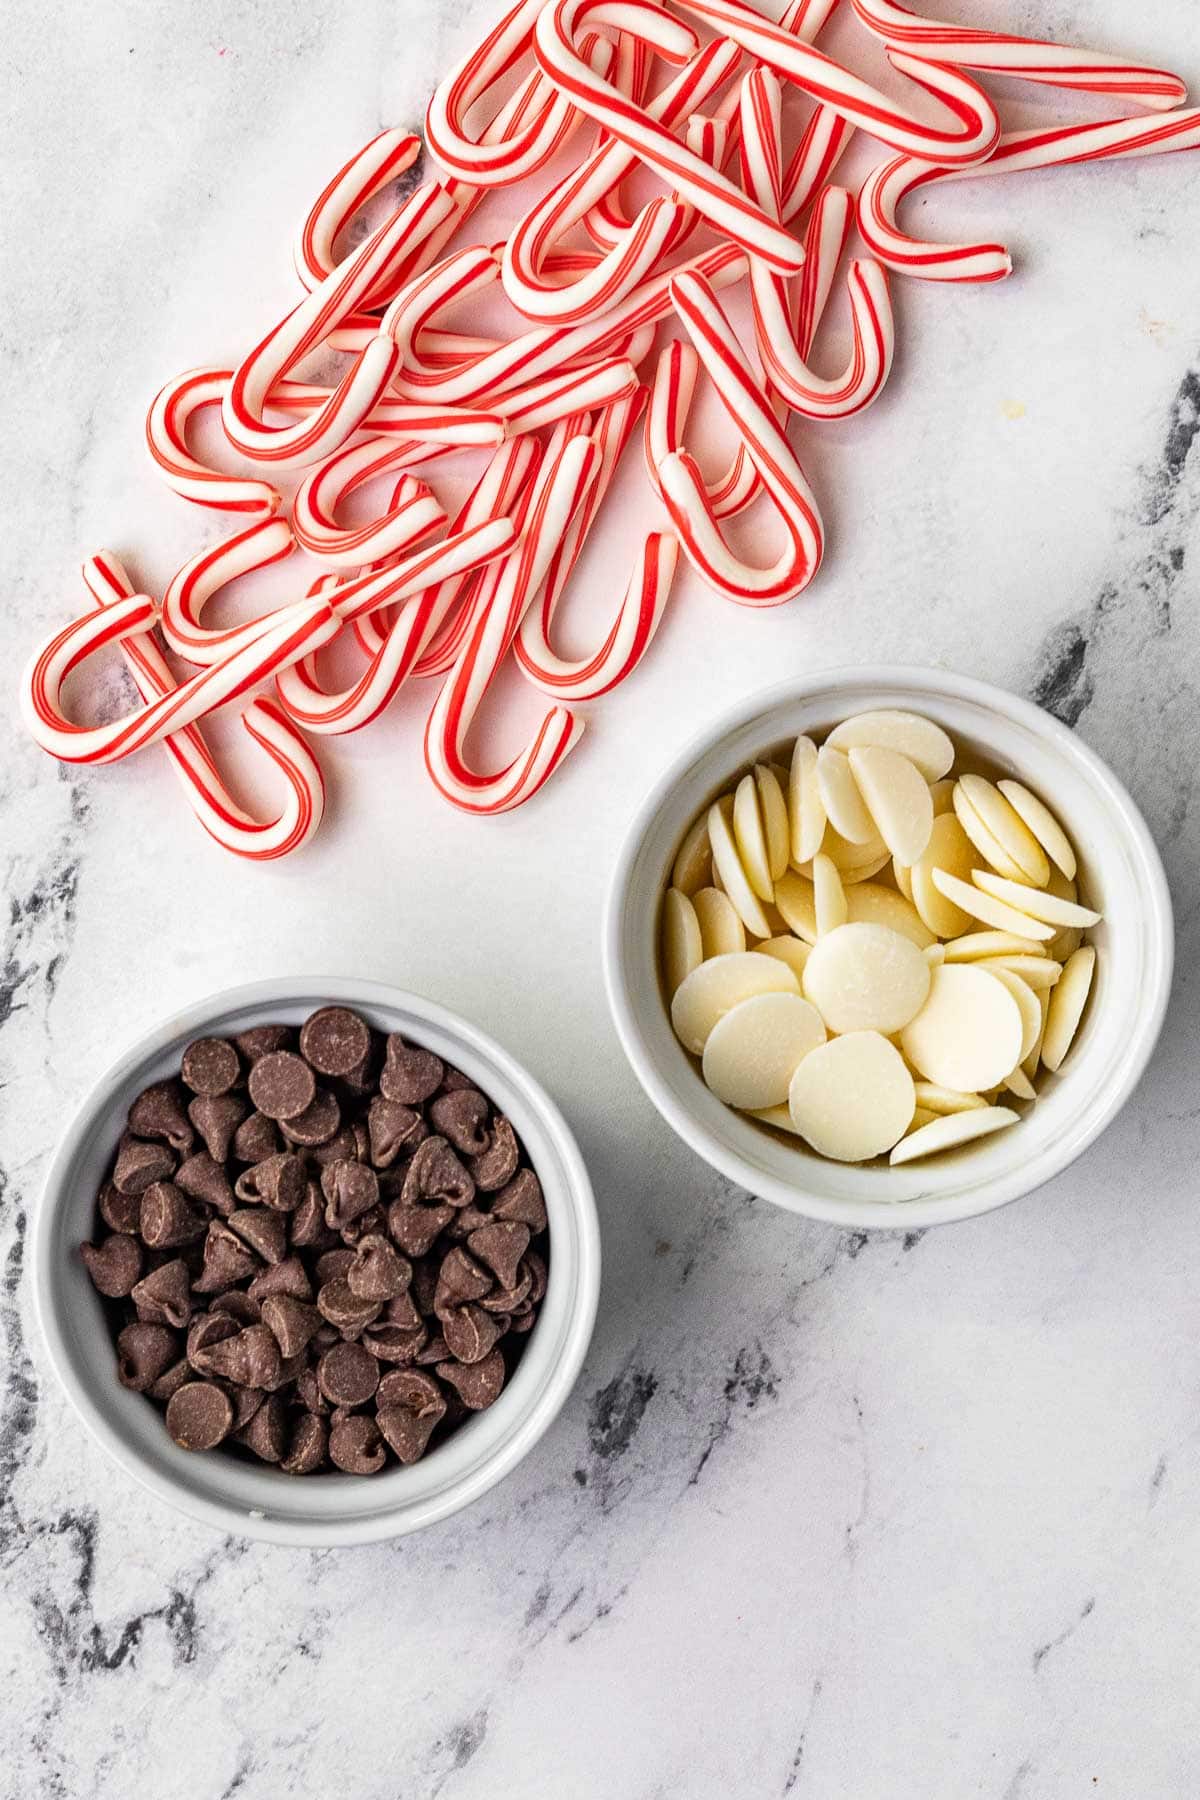 Chocolate Dipped Candy Canes ingredients